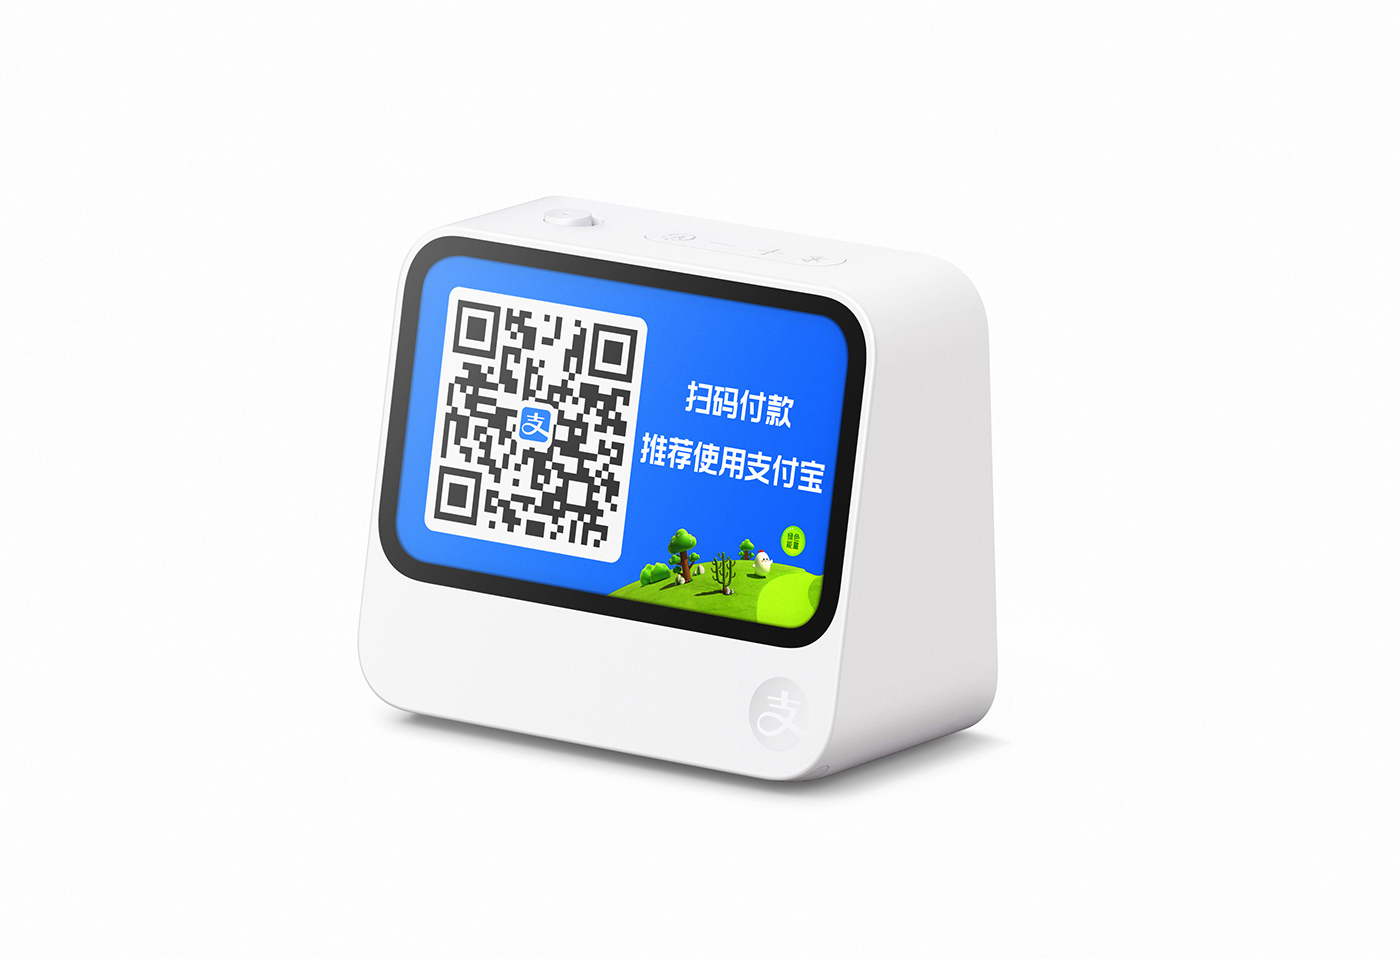 alipay ANT group bluetooth speaker industrial design  payment product product design  alibaba speaker cmf